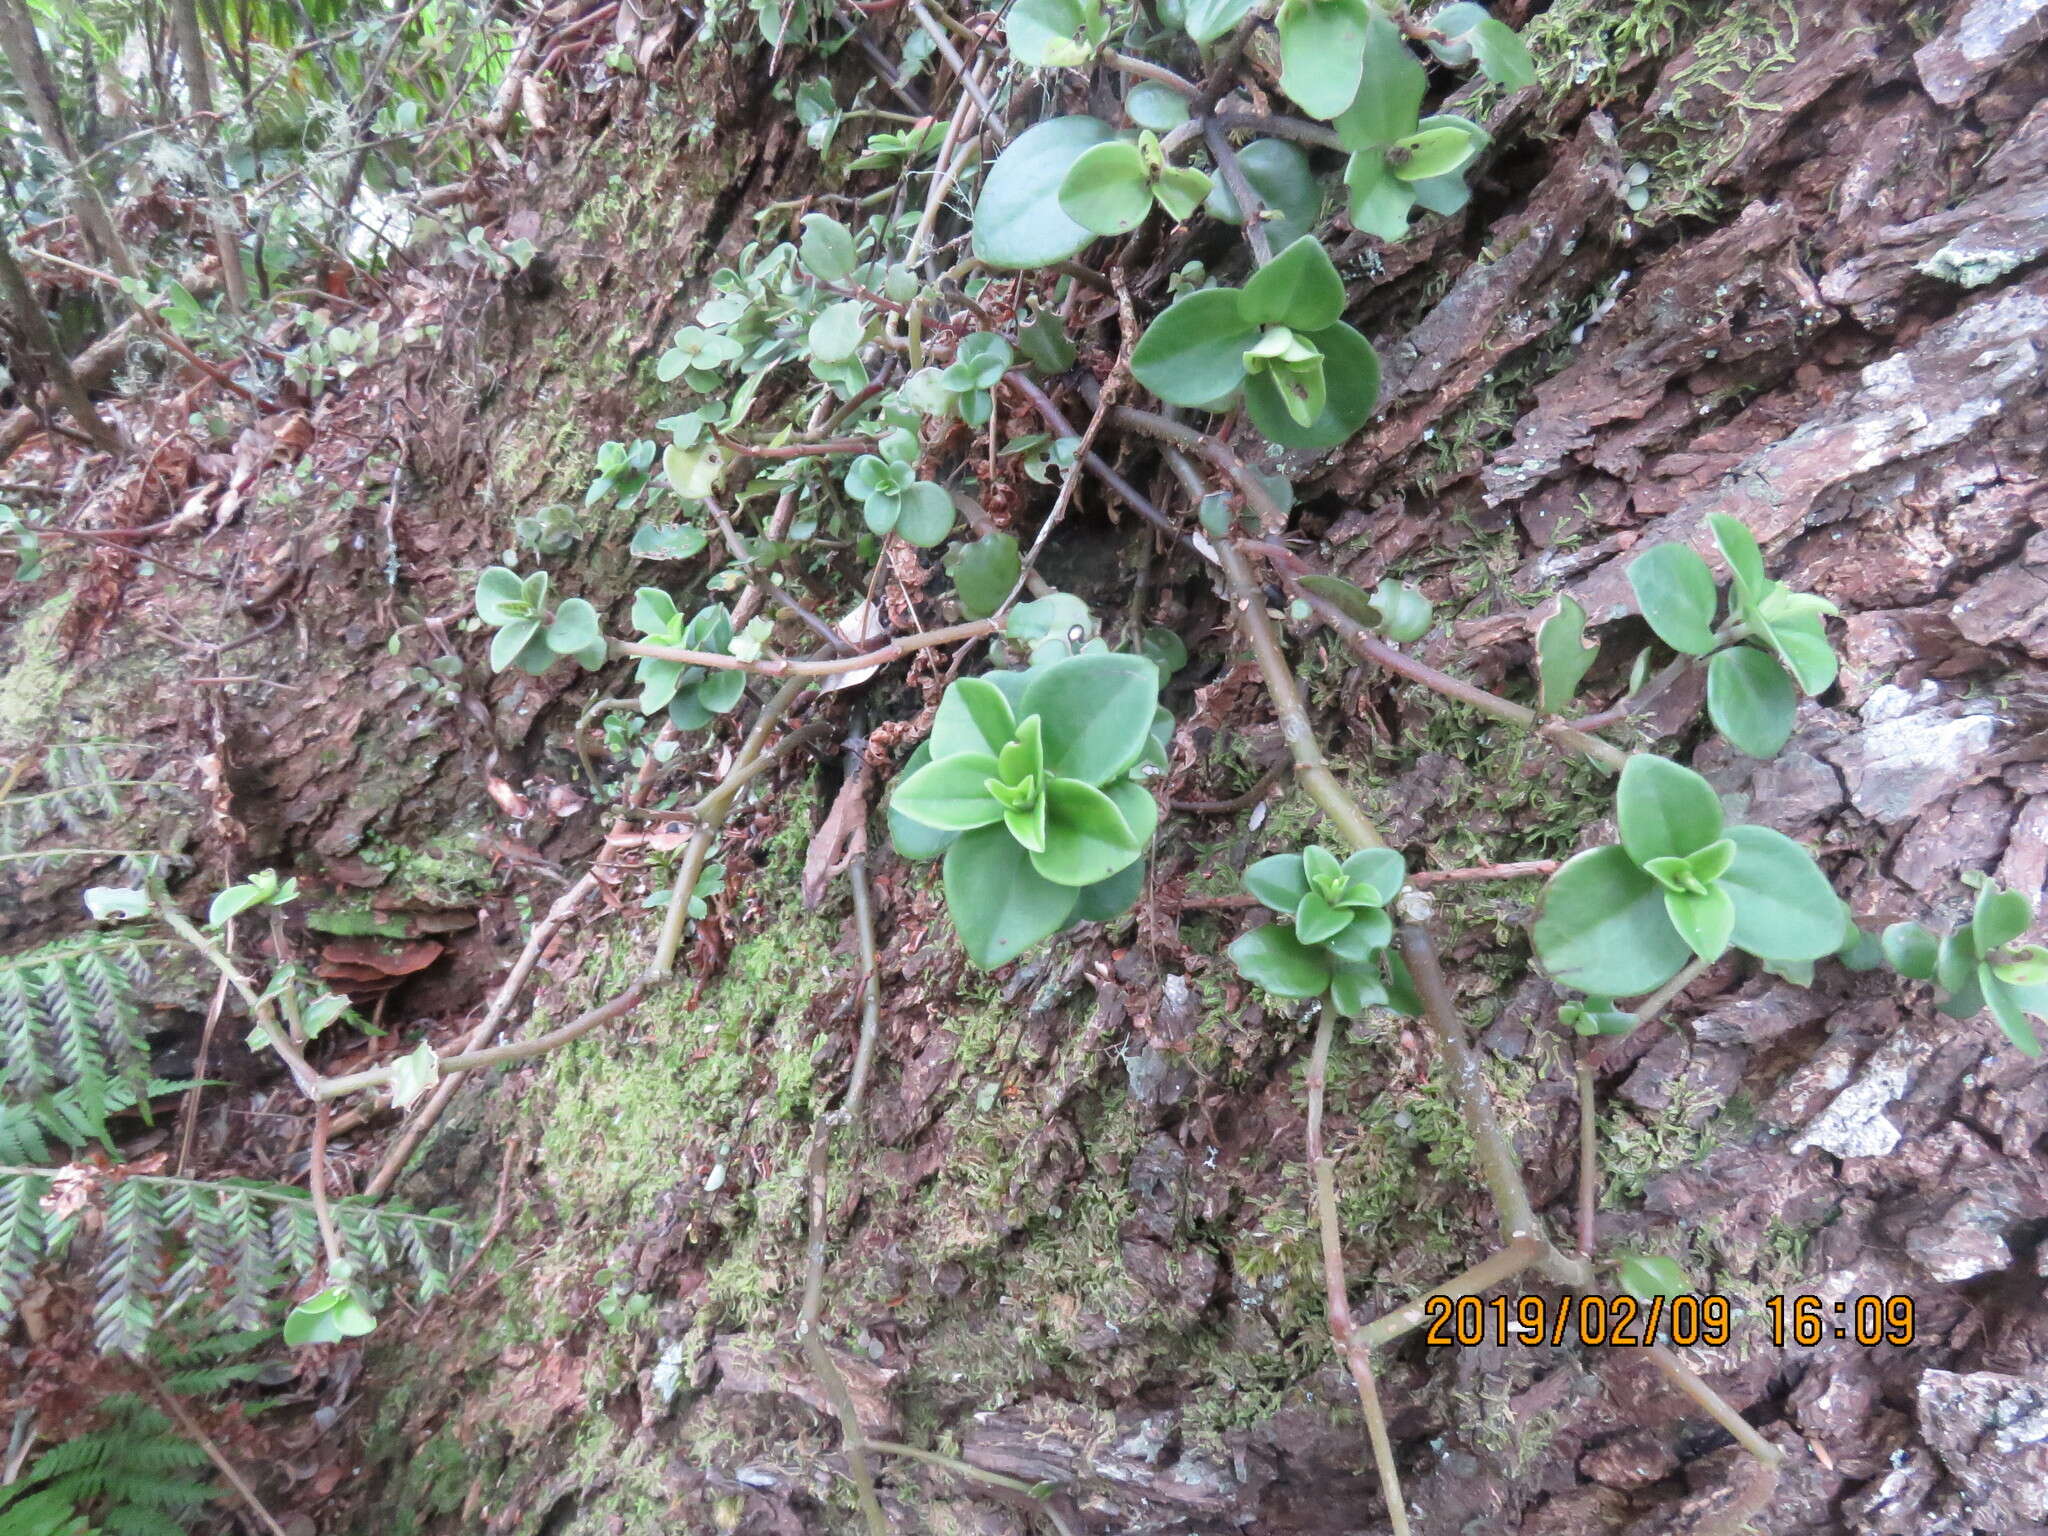 Image of thickleaf peperomia